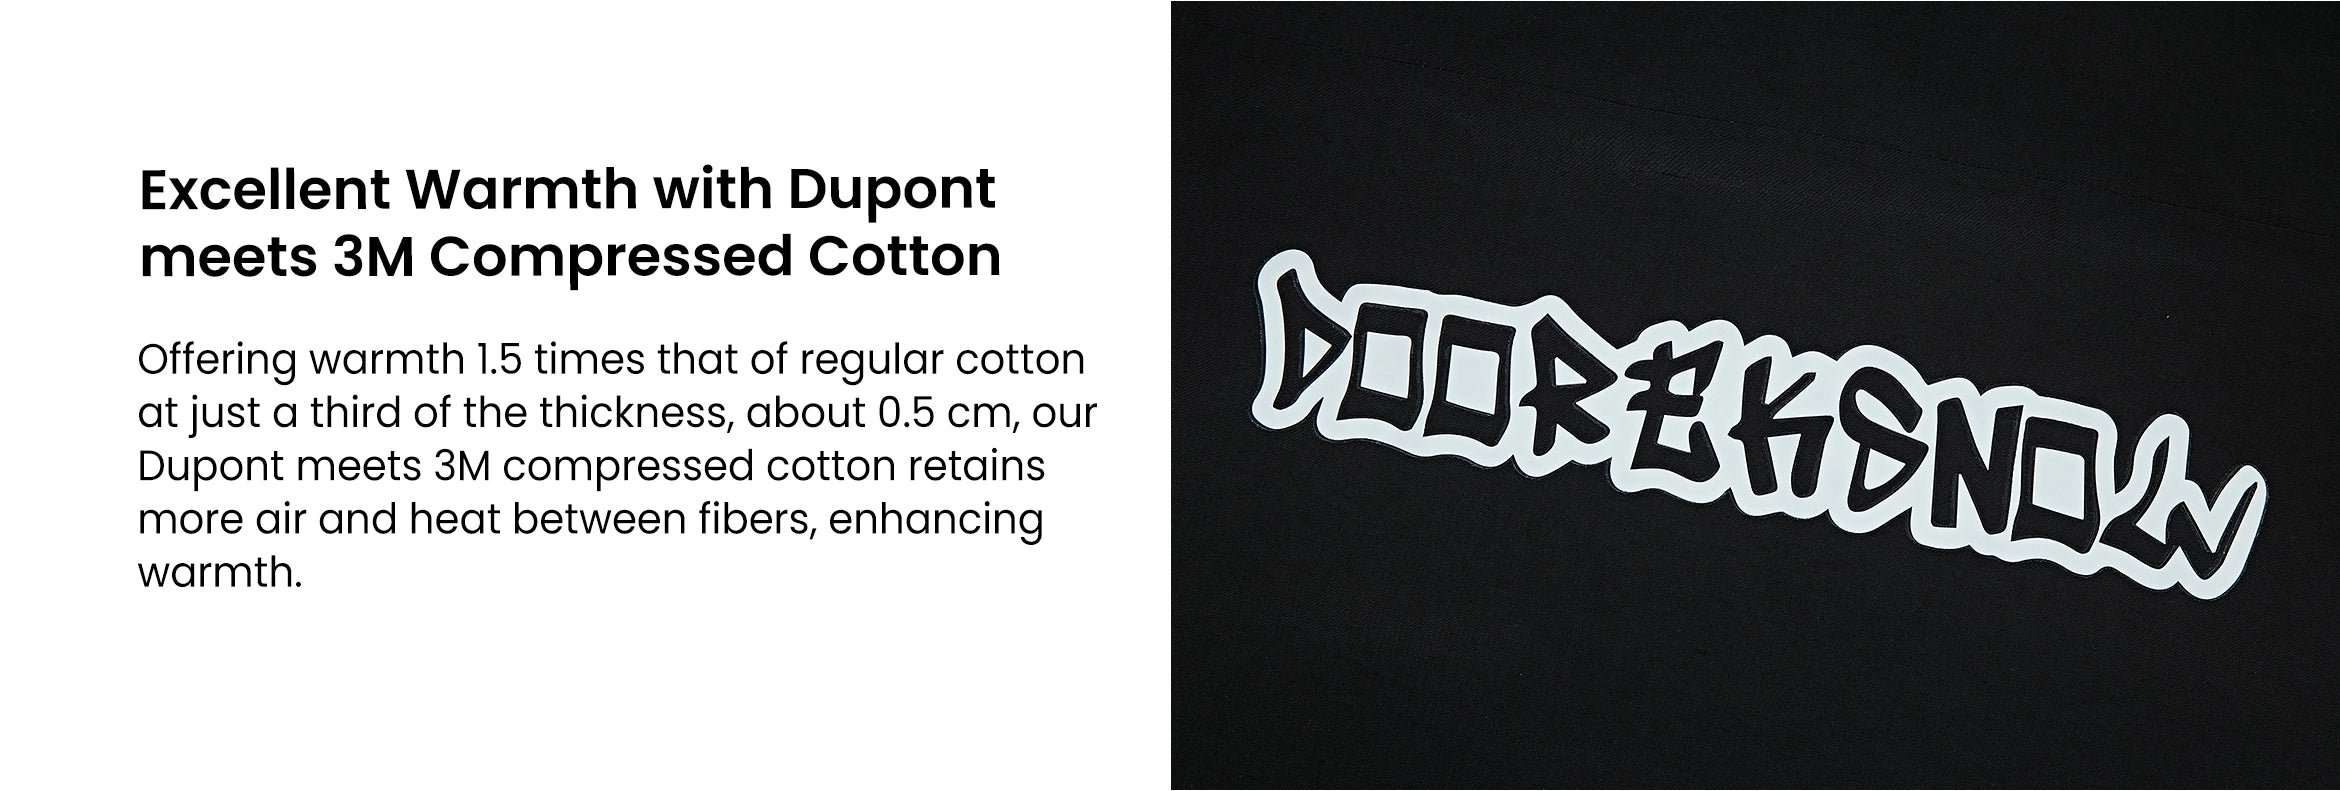 10. Excellent Warmth with Dupont meets 3M Compressed Cotton